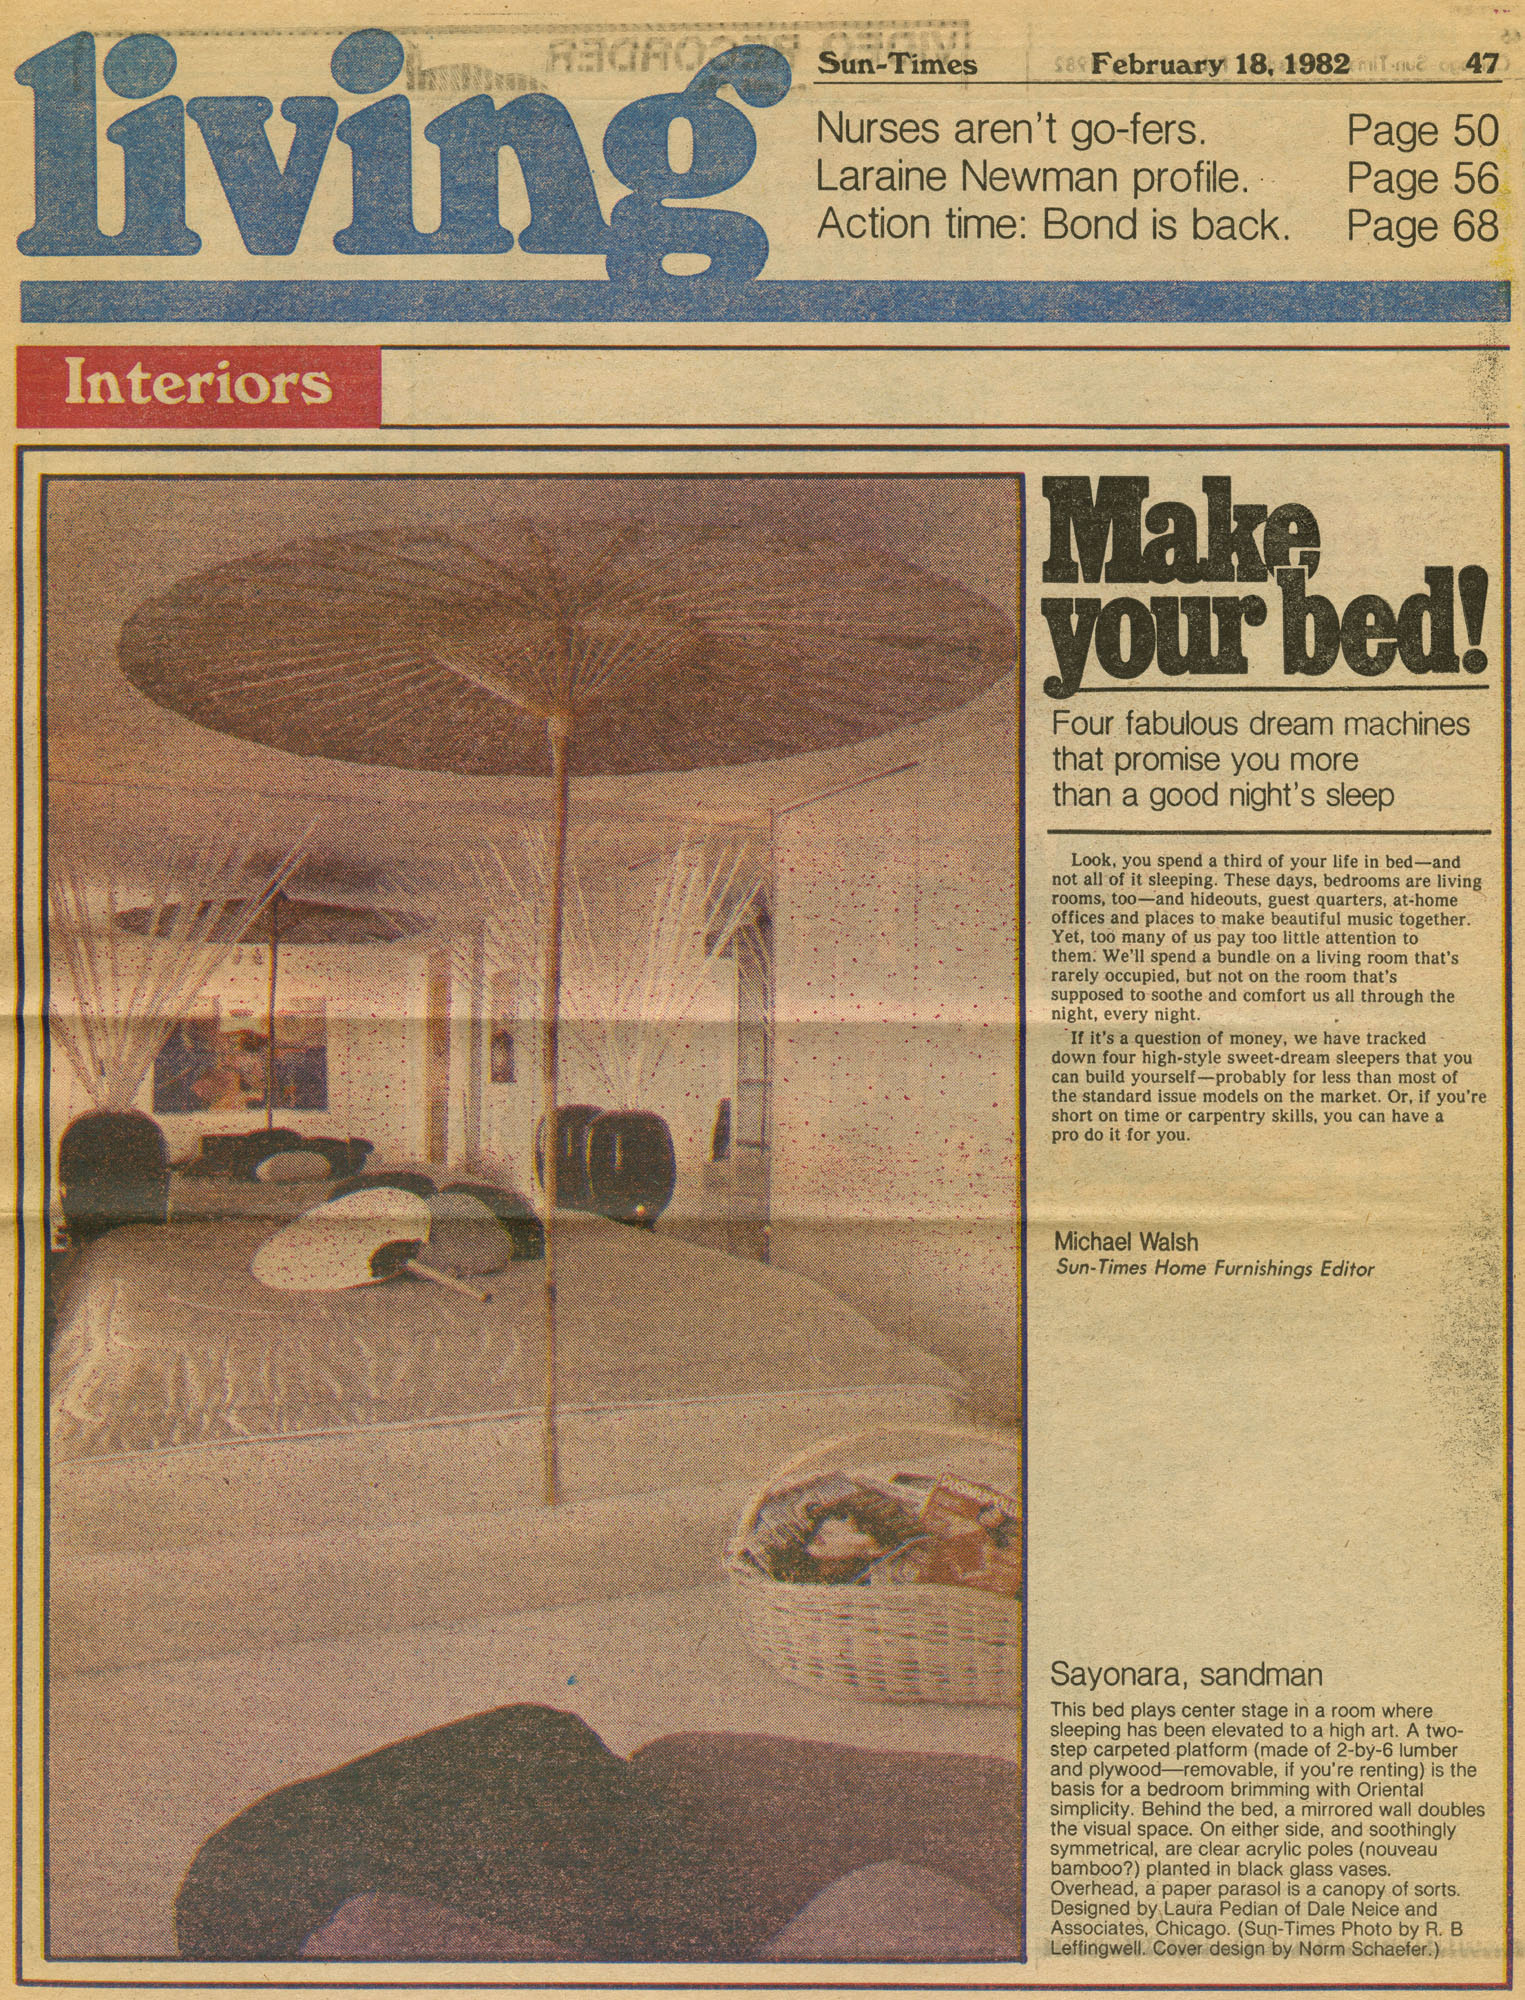 feb18,1982 Sun-times- Make Your Bed!